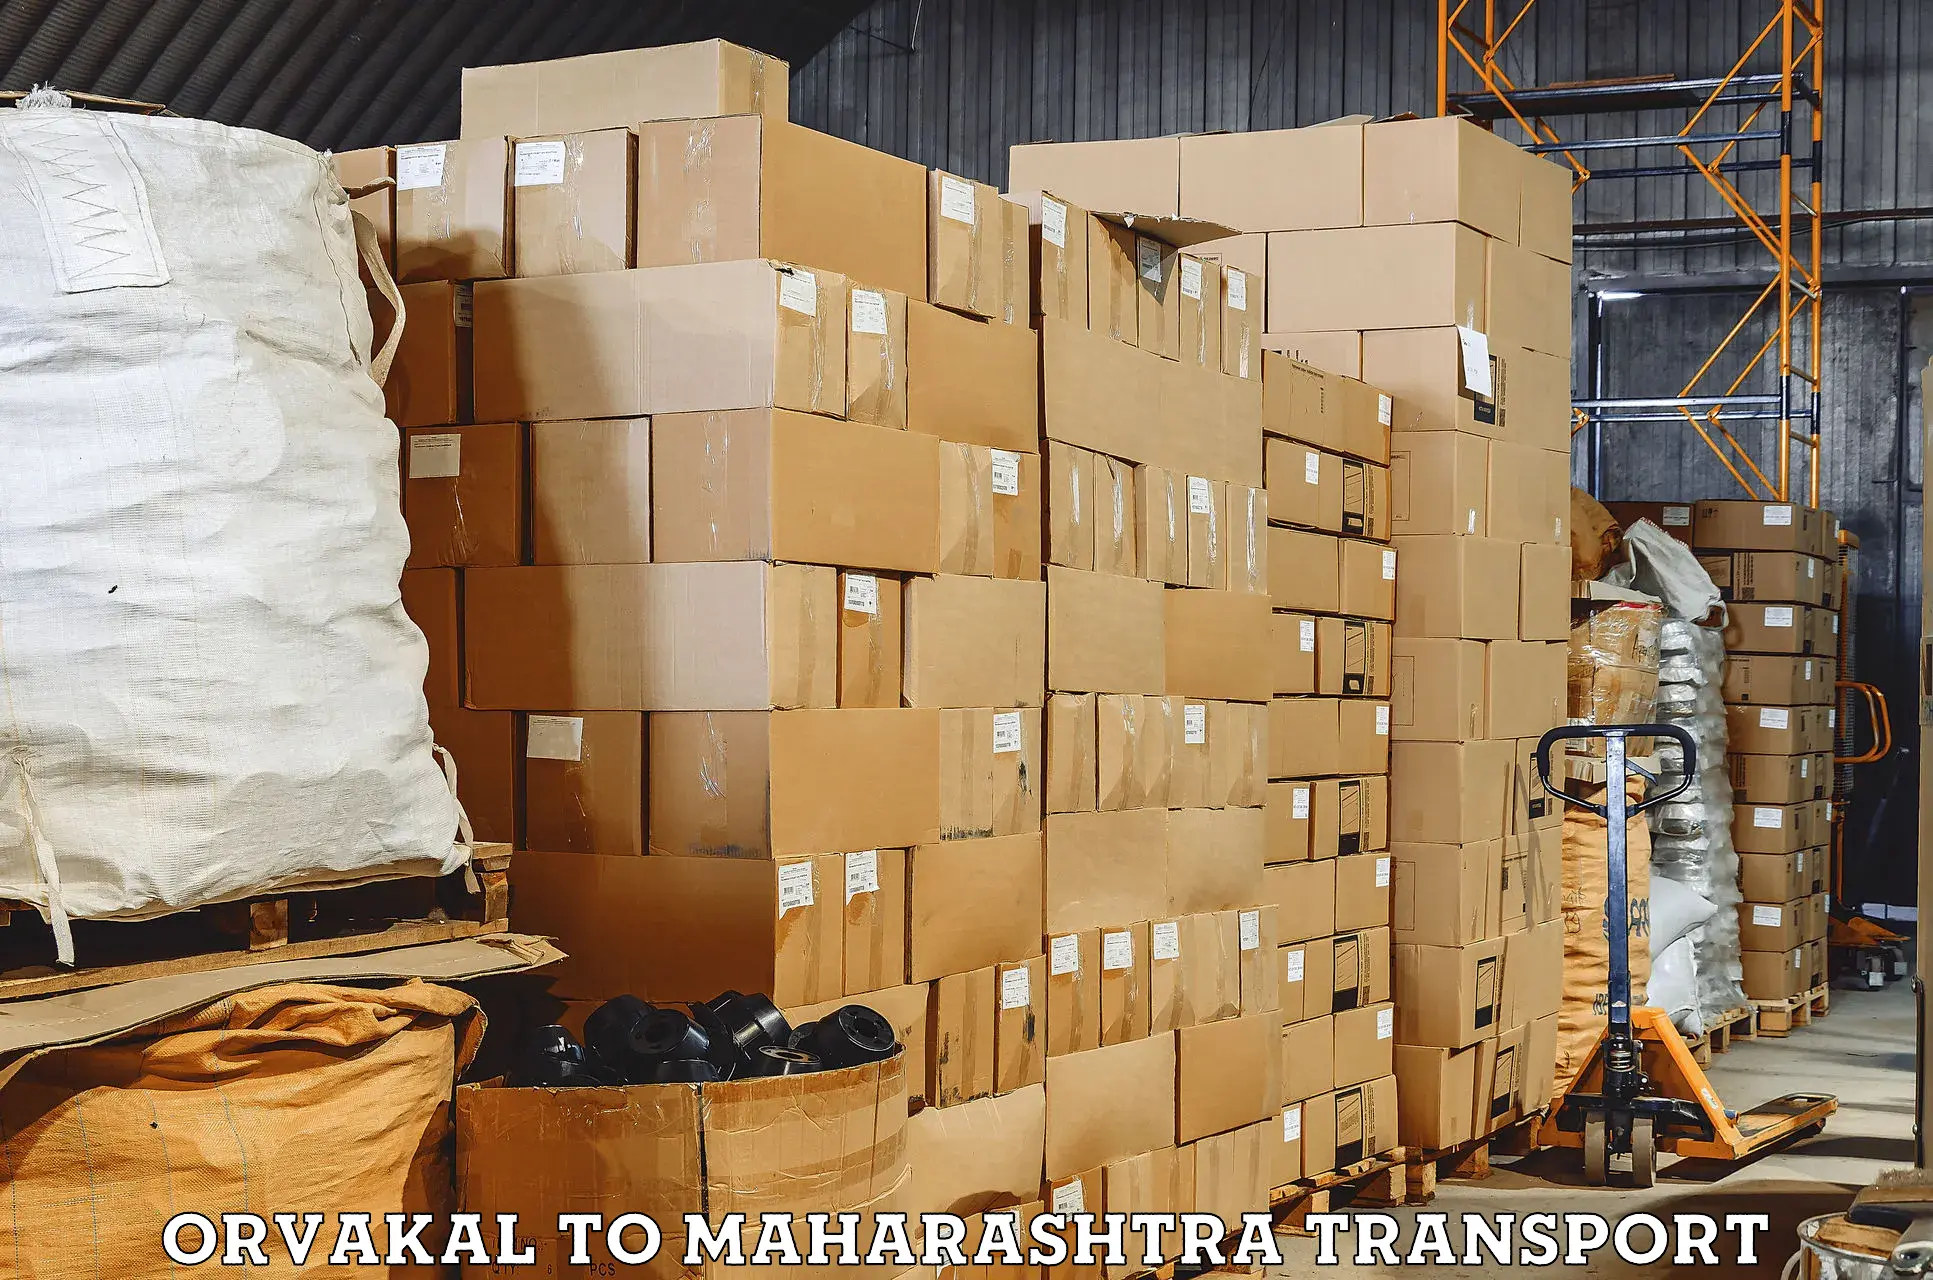 Vehicle transport services in Orvakal to Shrivardhan